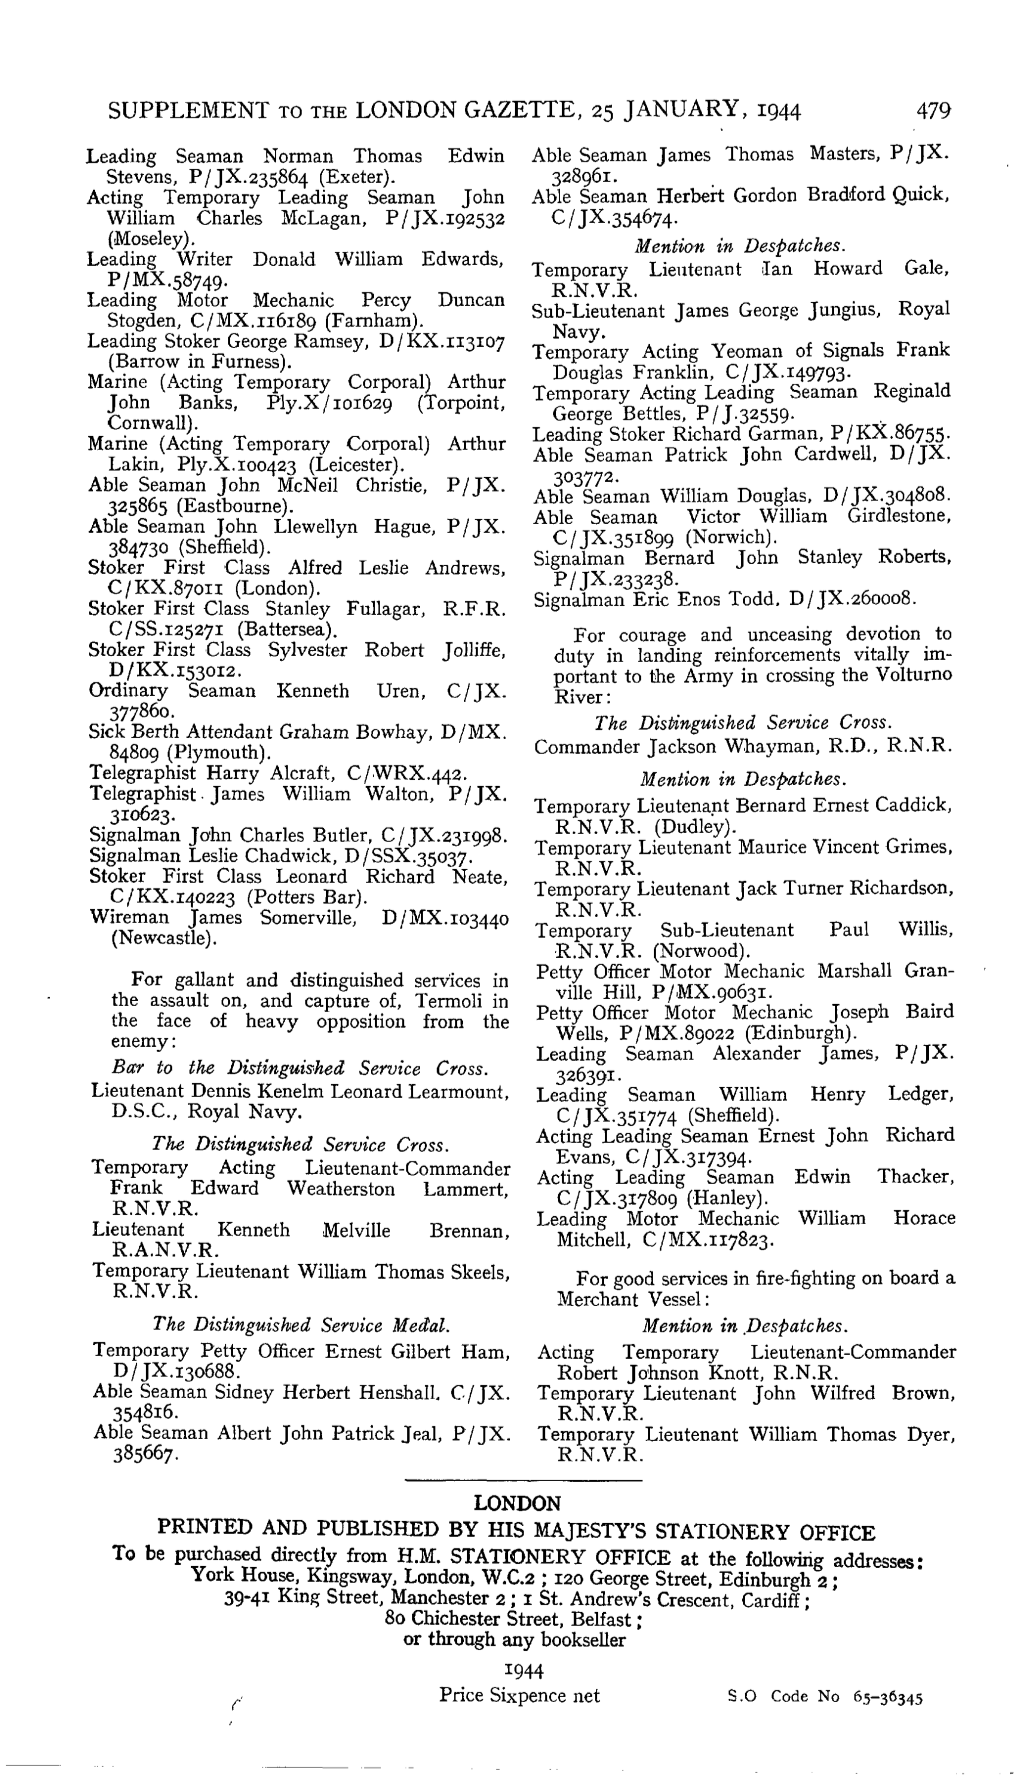 Supplement to the London Gazette, 25 January, 1944 479